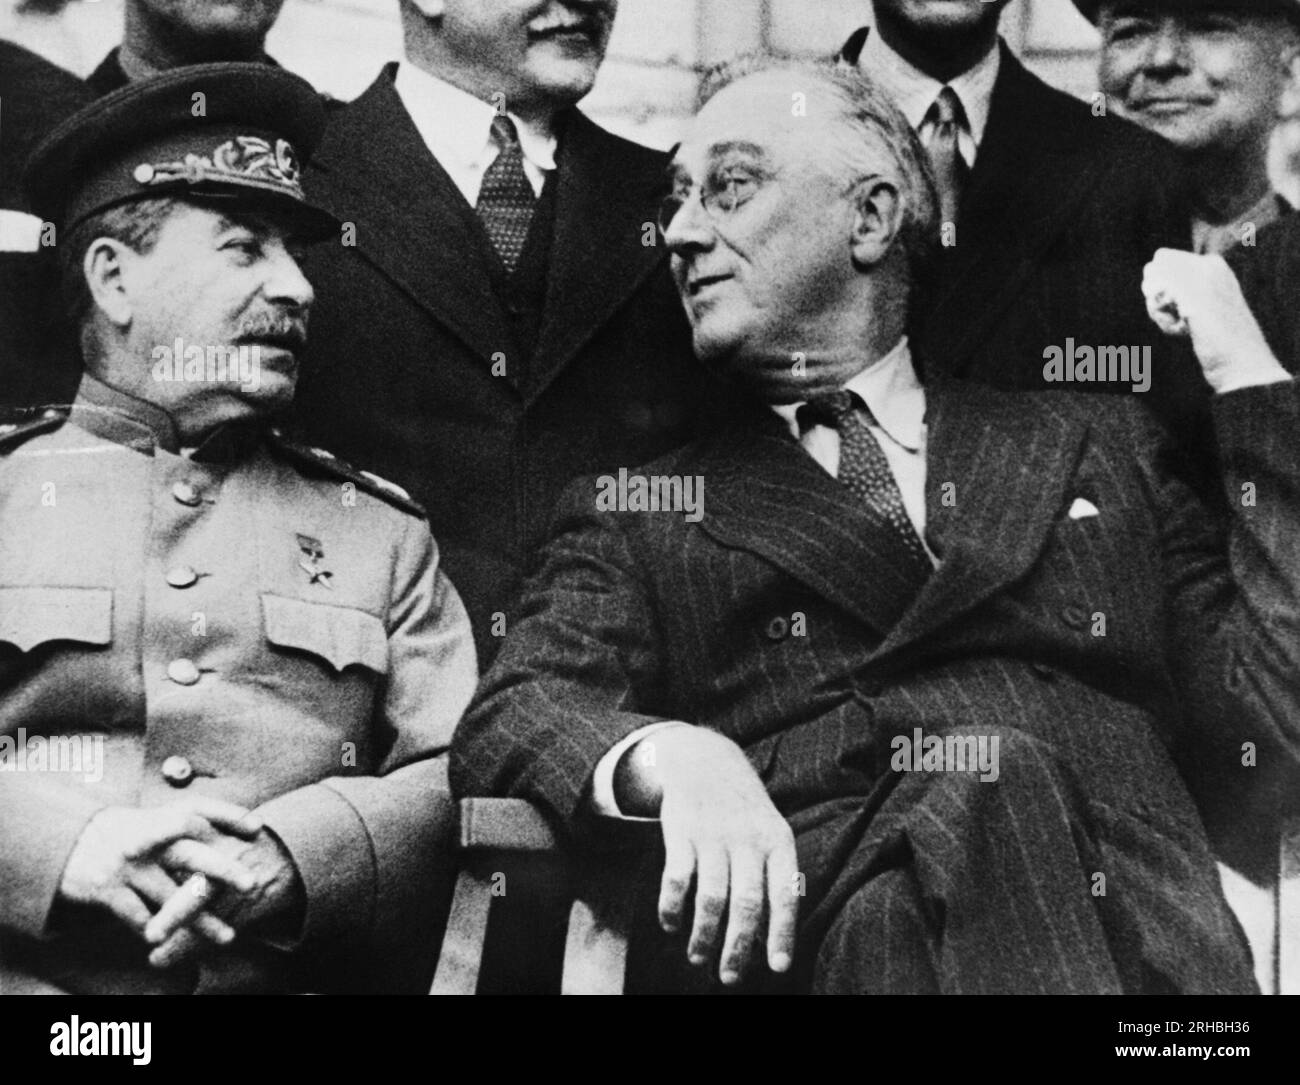 Tehran, Iran: December 7, 1943 Russian leader Marshal Josef Stalin and President Franklin Roosevelt confer in the Soviet Embassy during the Tehran Conference. Stock Photo